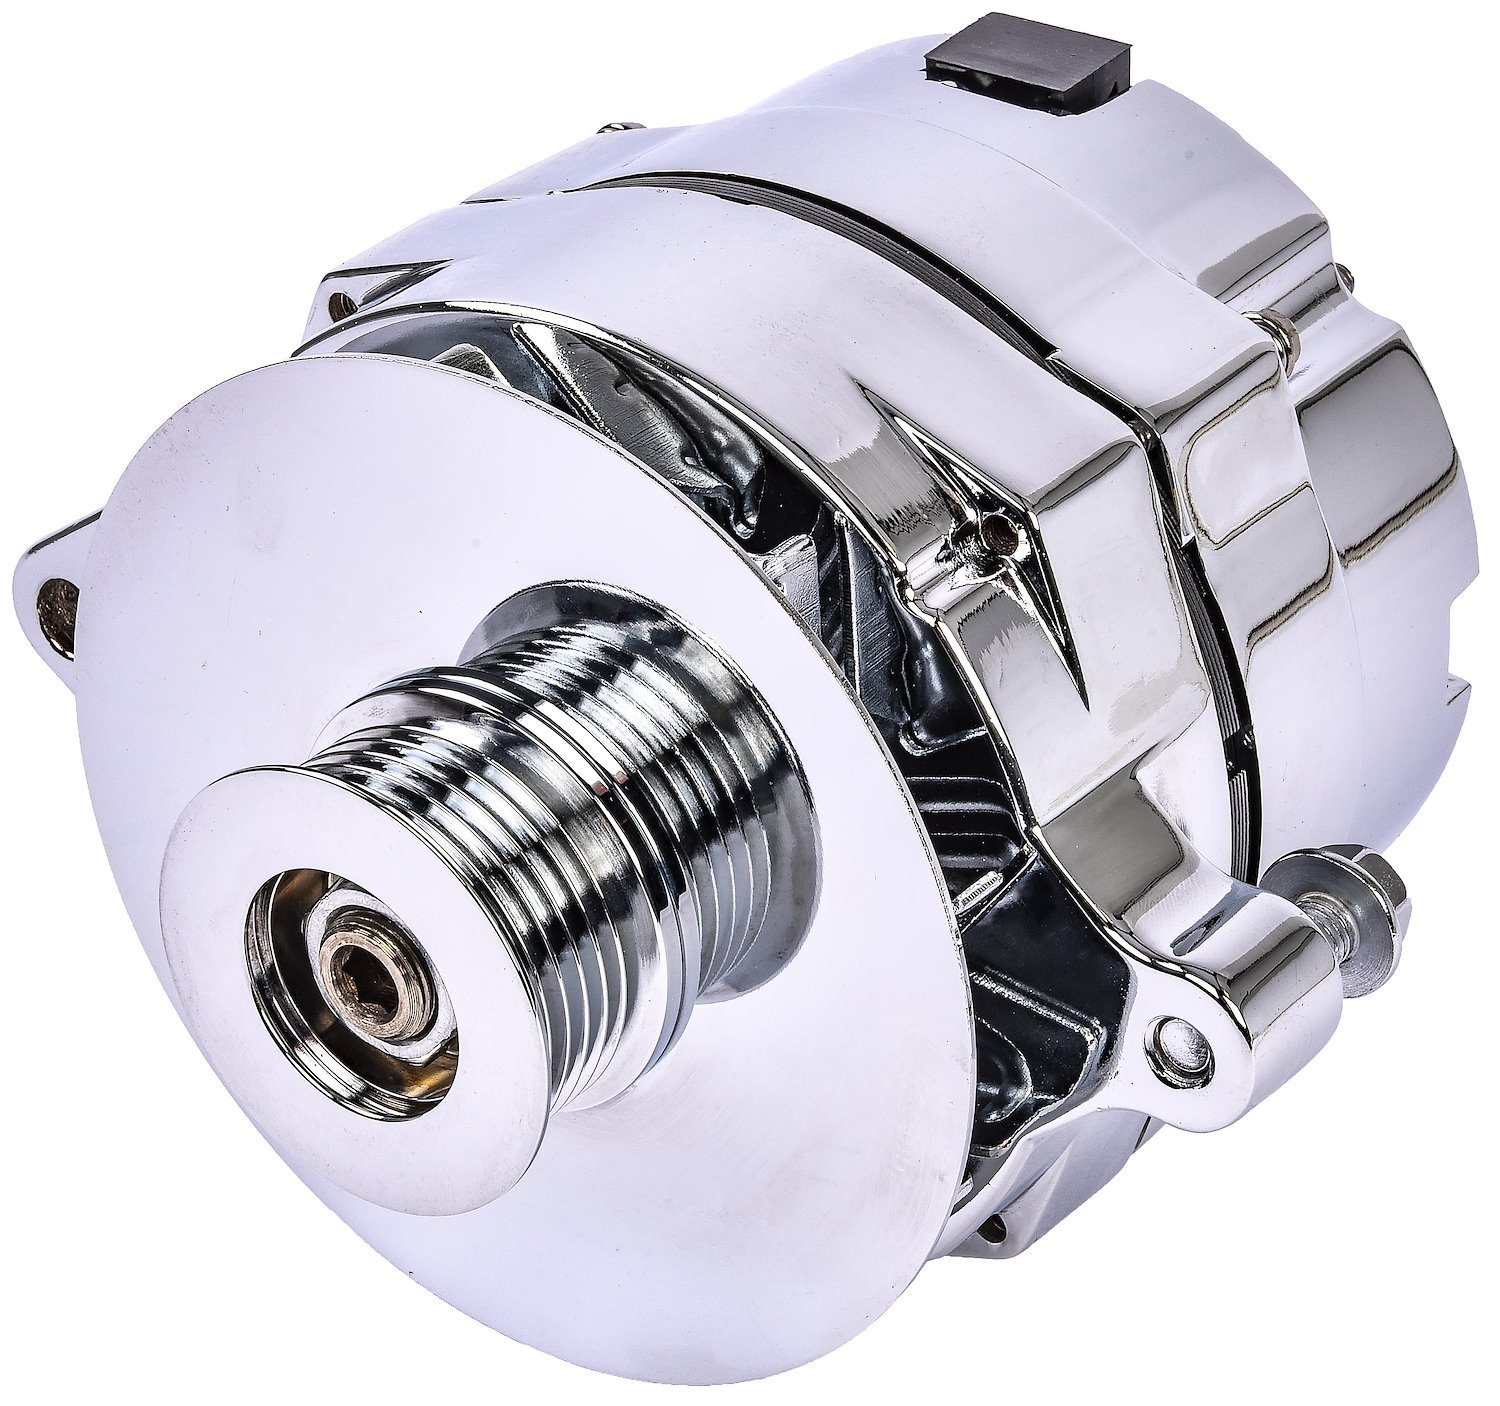 Ford 1-Wire Alternator, 140 amp Output with Serpentine Belt Pulley [Chrome Plated Finish]